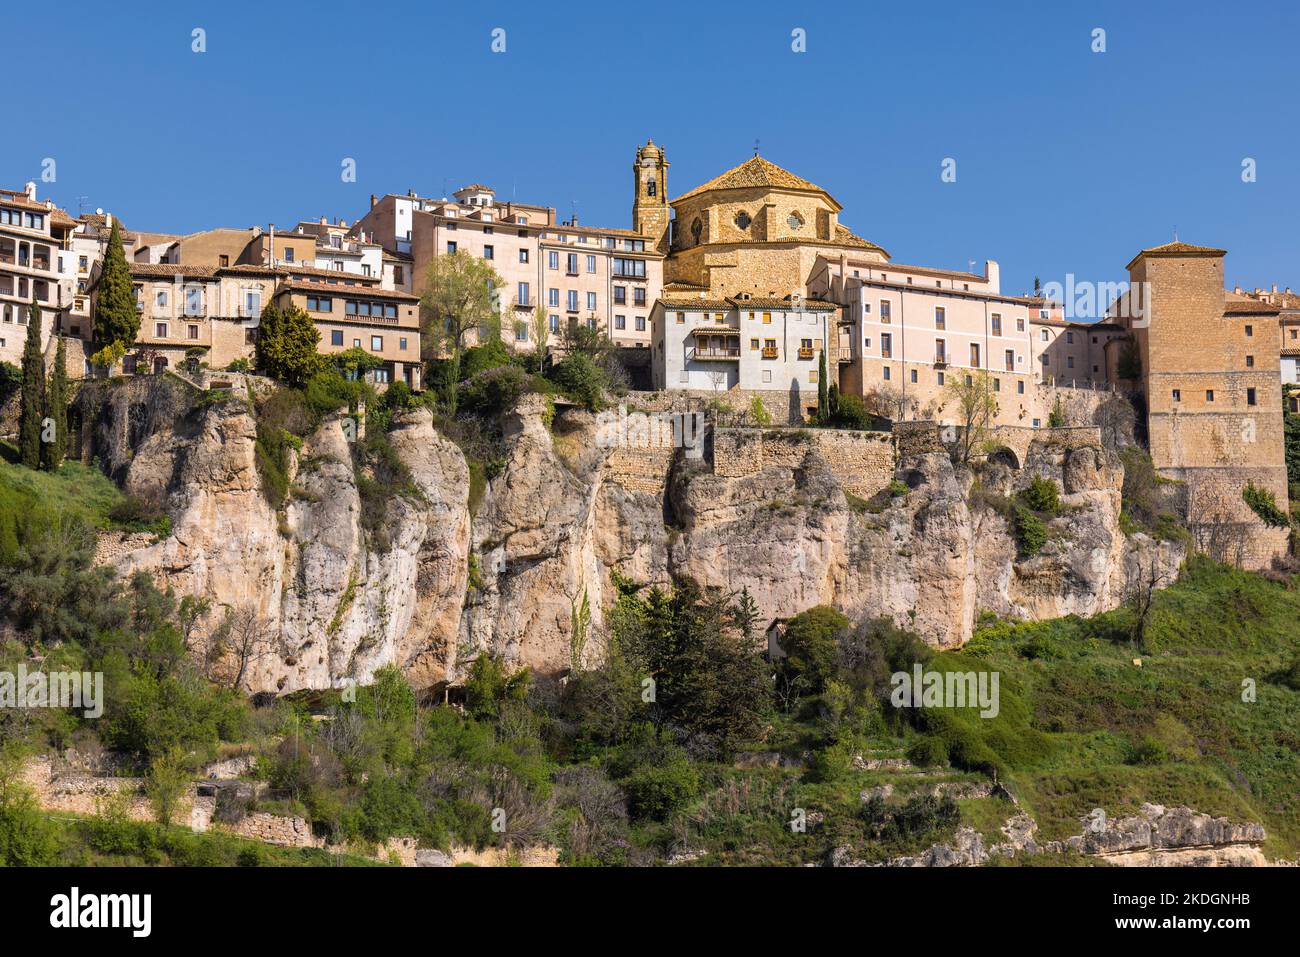 Cuenca, Cuenca Province, Castile-La Mancha, Spain.  The old town seen across the Huecar gorge.  The church is the Iglesia de San Pedro, or St Peter's Stock Photo